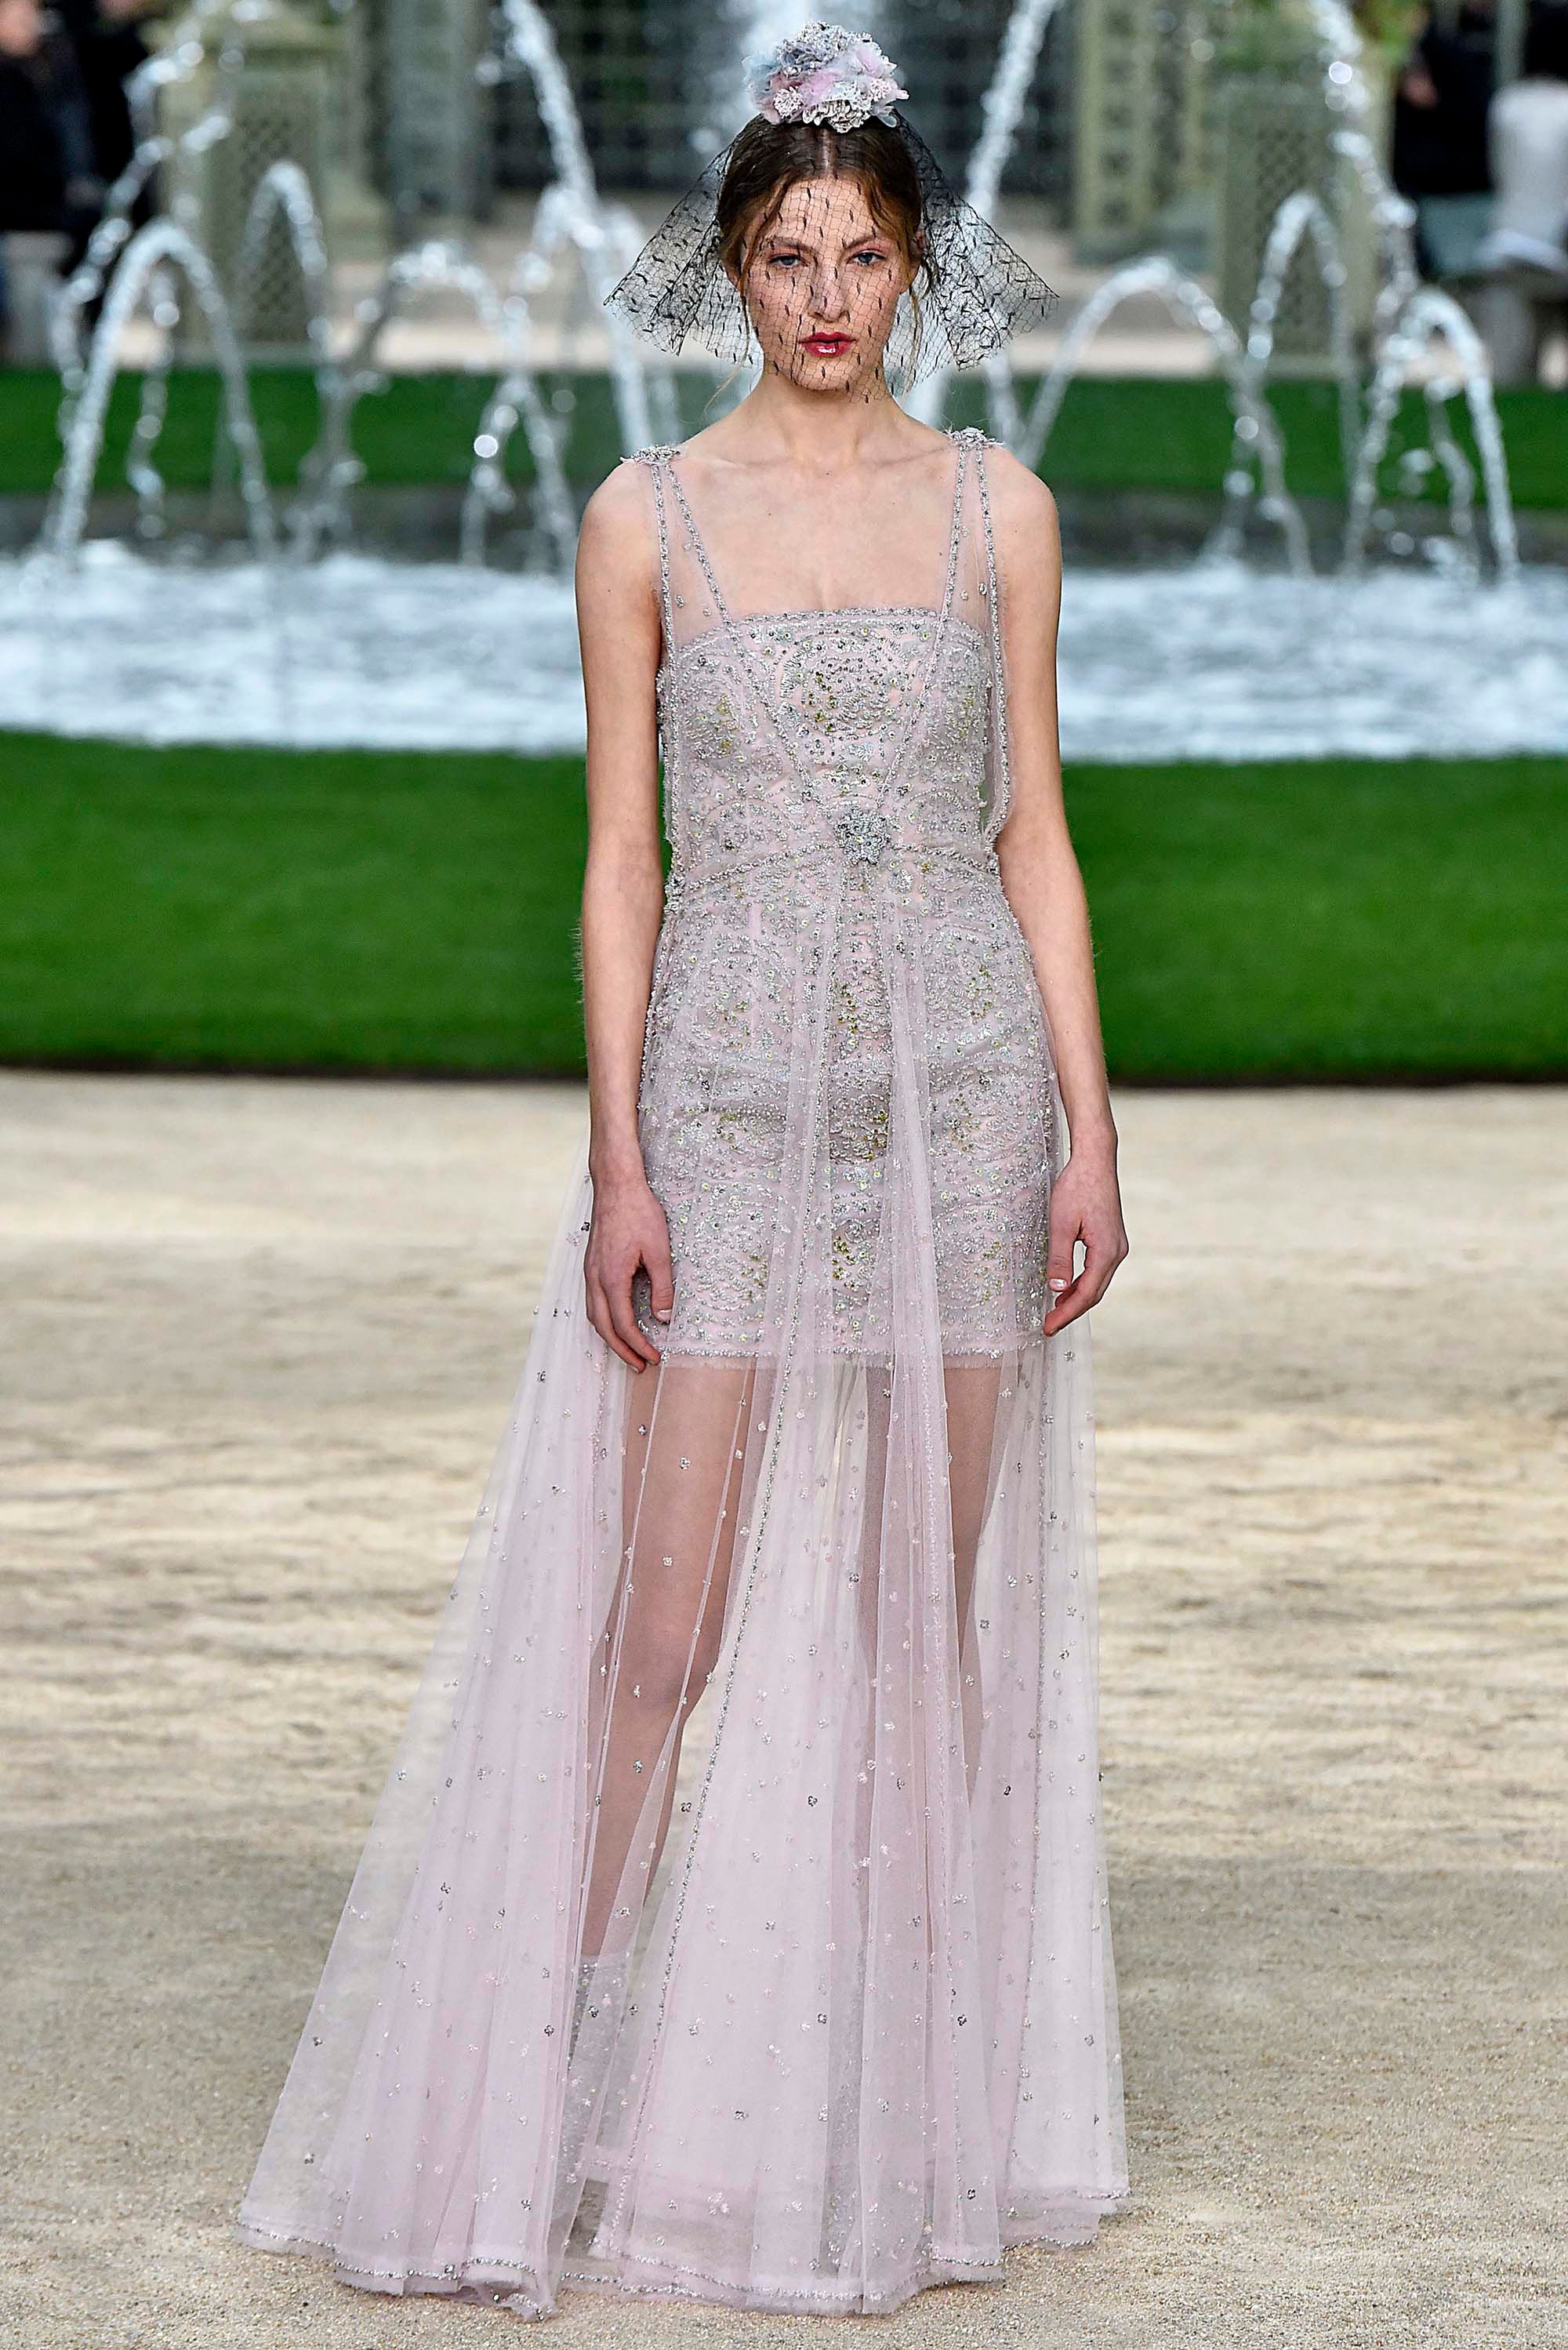 Chanel S/S 18 couture #67 - Tagwalk: The Fashion Search Engine